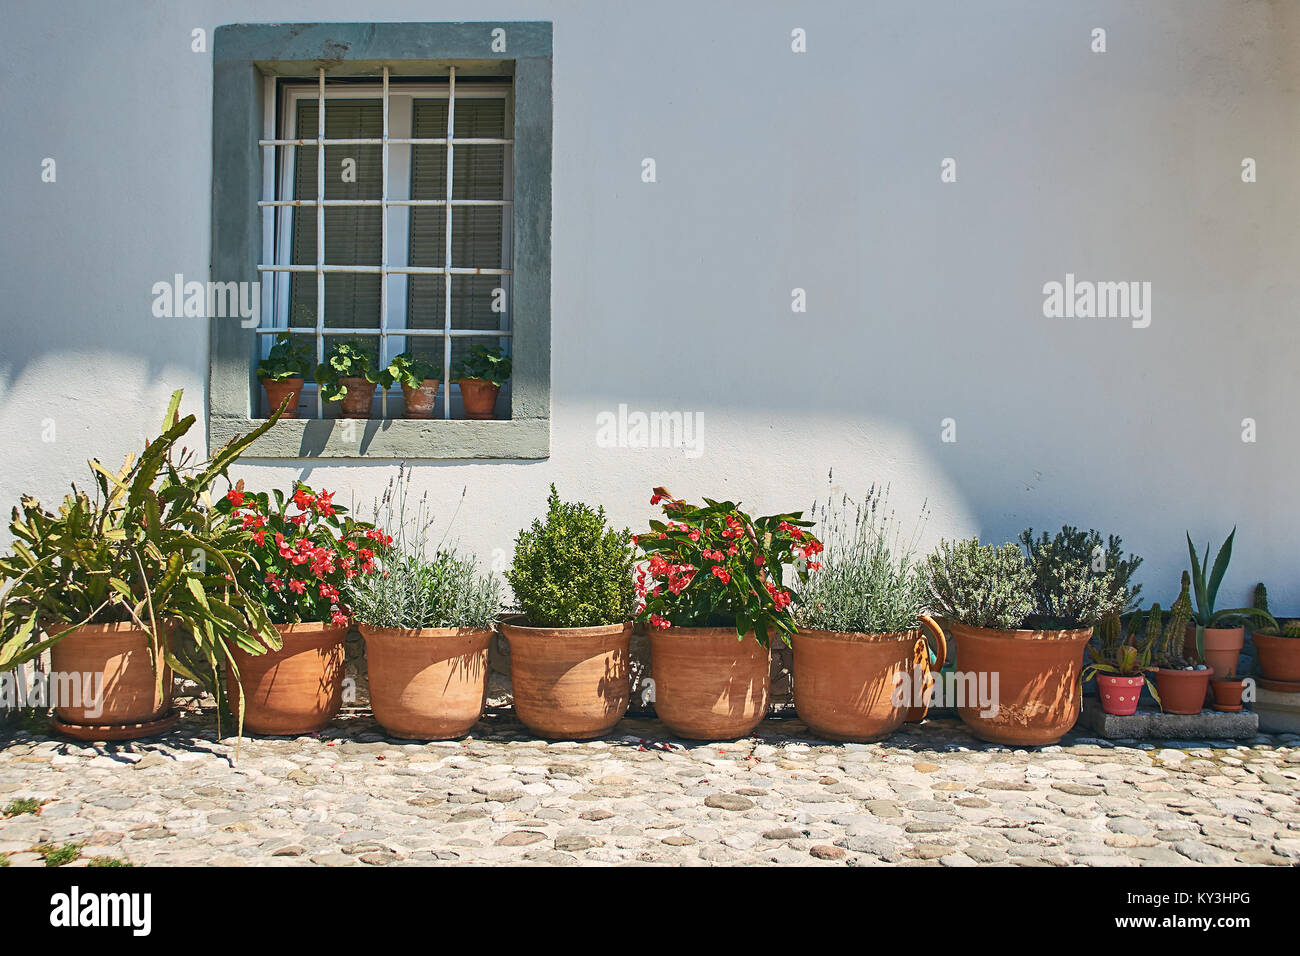 Ceramic pots with decorative plants standing by the wall Stock Photo